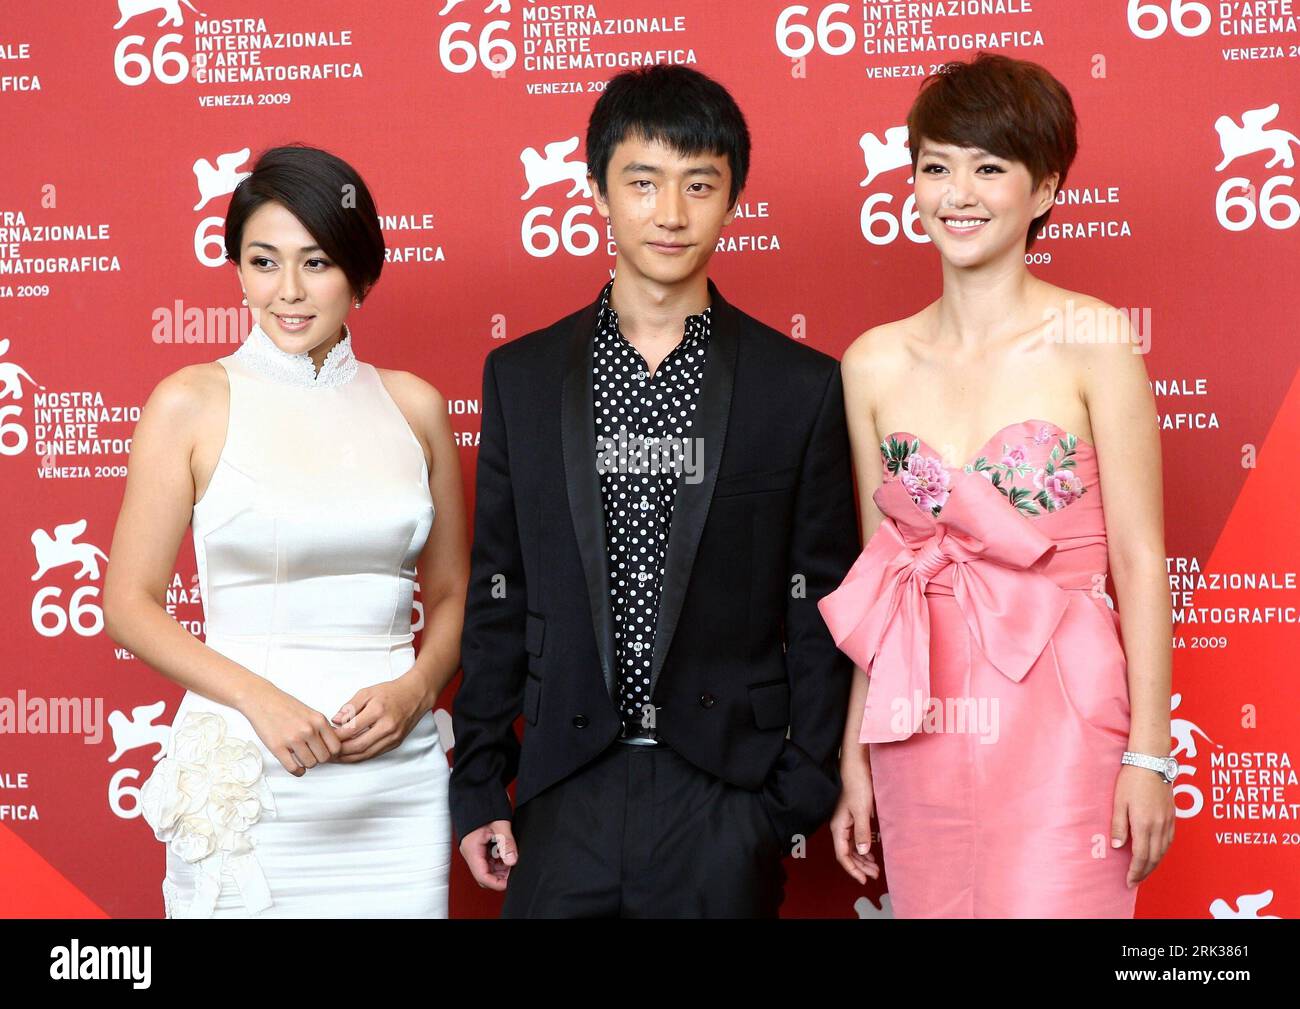 Bildnummer: 53350977  Datum: 12.09.2009  Copyright: imago/Xinhua (090912) -- VENICE, Sept. 12, 2009 (Xinhua) -- Actress Wu Anya, actor Huang Xuan and actress Tan Weiwei (L-R) pose at the photocall for the closing film Chengdu, wo ai ni (Chengdu, I Love You) during the 66th Venice International Film Festival at Venice Lido, on Sept. 12, 2009. (Xinhua) (nxl) (7)ITALY-VENICE-FILM-FESTIVAL-CHENGDU PUBLICATIONxNOTxINxCHN People Film Filmfestival Venedig o00 Biennale o00 o00 Biennale kbdig xcb 2009 quer premiumd o00 66.    Bildnummer 53350977 Date 12 09 2009 Copyright Imago XINHUA  Venice Sept 12 20 Stock Photo